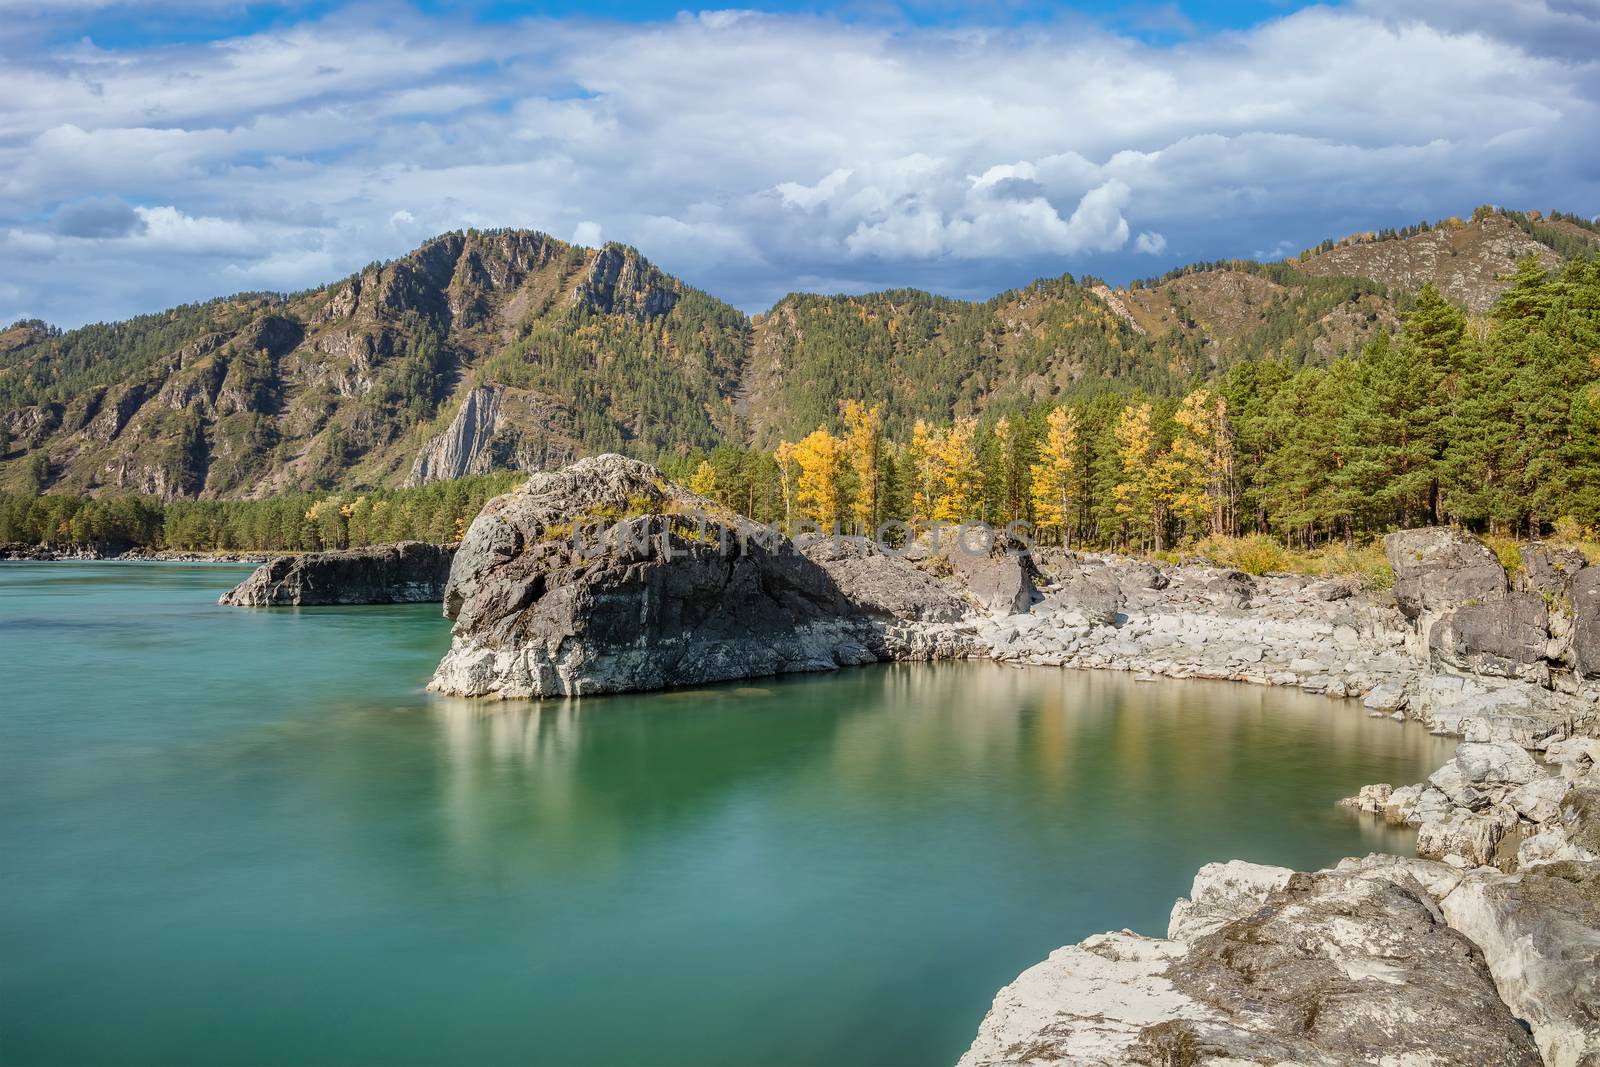 Beautiful view of a small cove on the Katun river in Altai mountains, Siberia, Russia. Long exposure. Smooth turquoise water in the foreground and blue cloudy sky and mountains as a background by DamantisZ